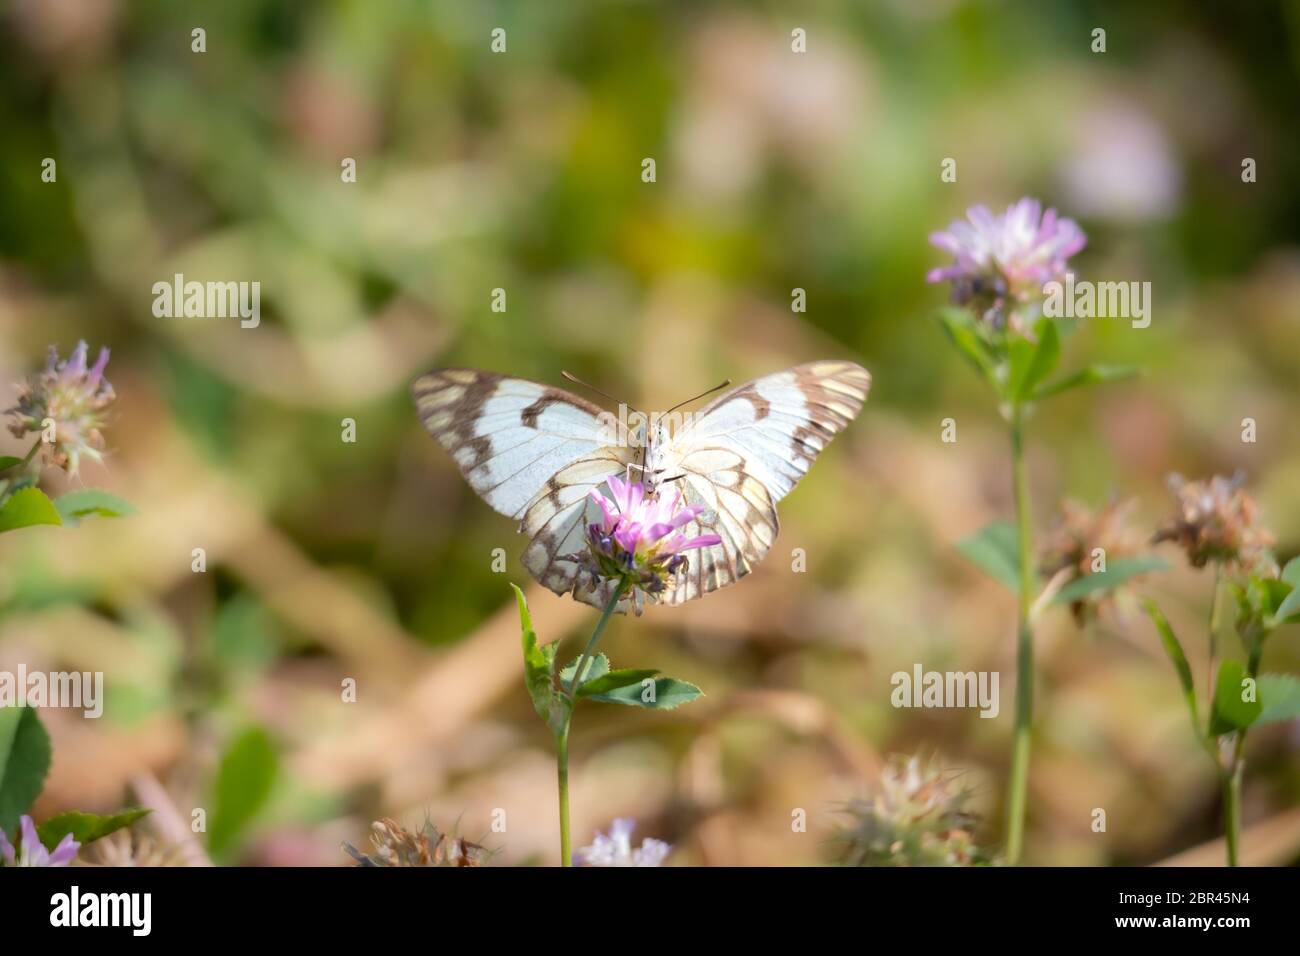 Close up shot of garden butterfly also known as Large white butterfly Stock Photo